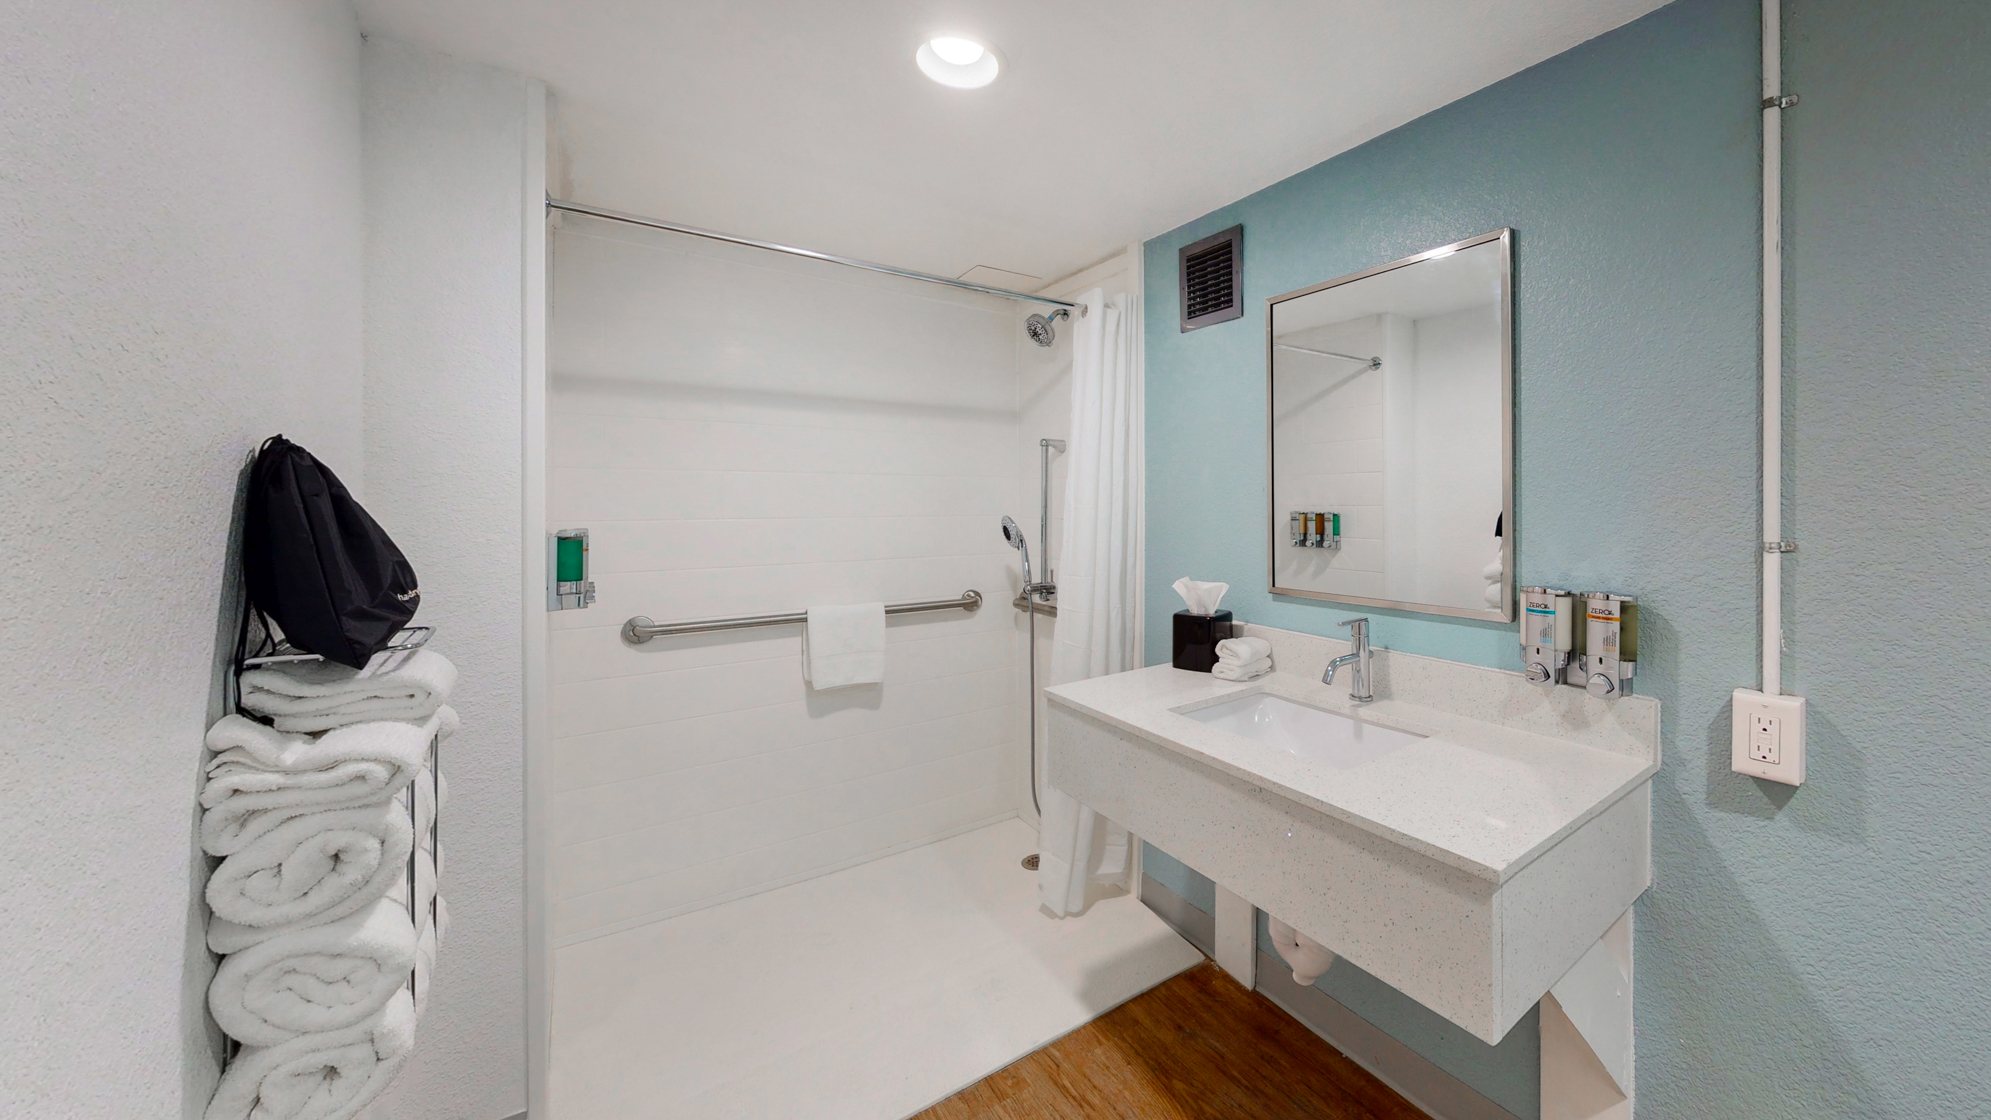 Accessible private bathroom in guest room with roll-in shower and roll under vanity.